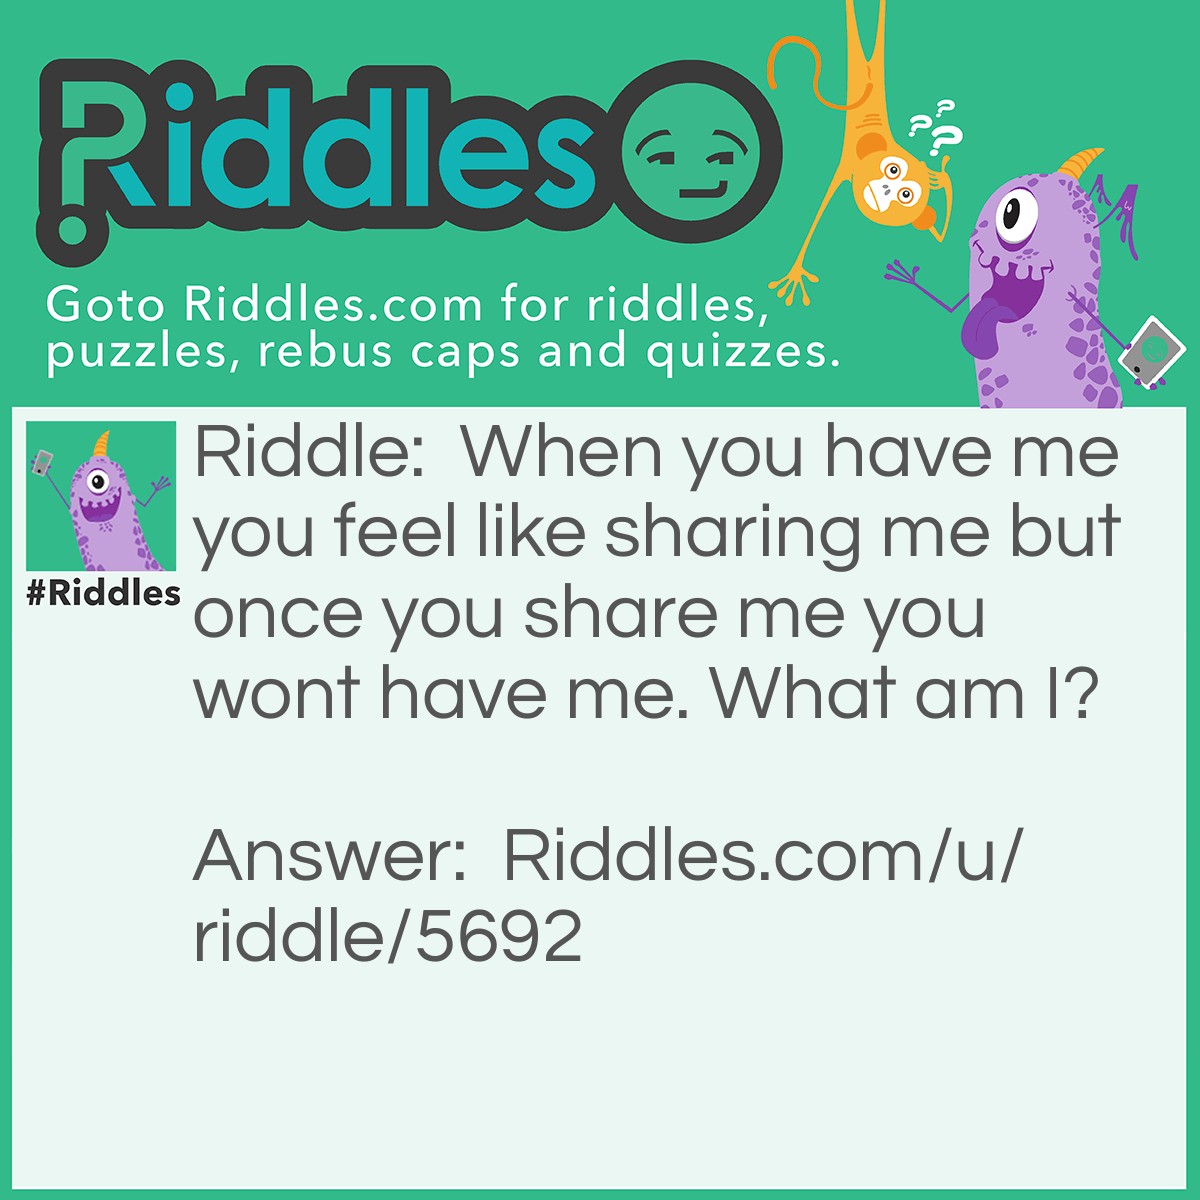 Riddle: When you have me you feel like sharing me but once you share me you wont have me. What am I? Answer: A secret.